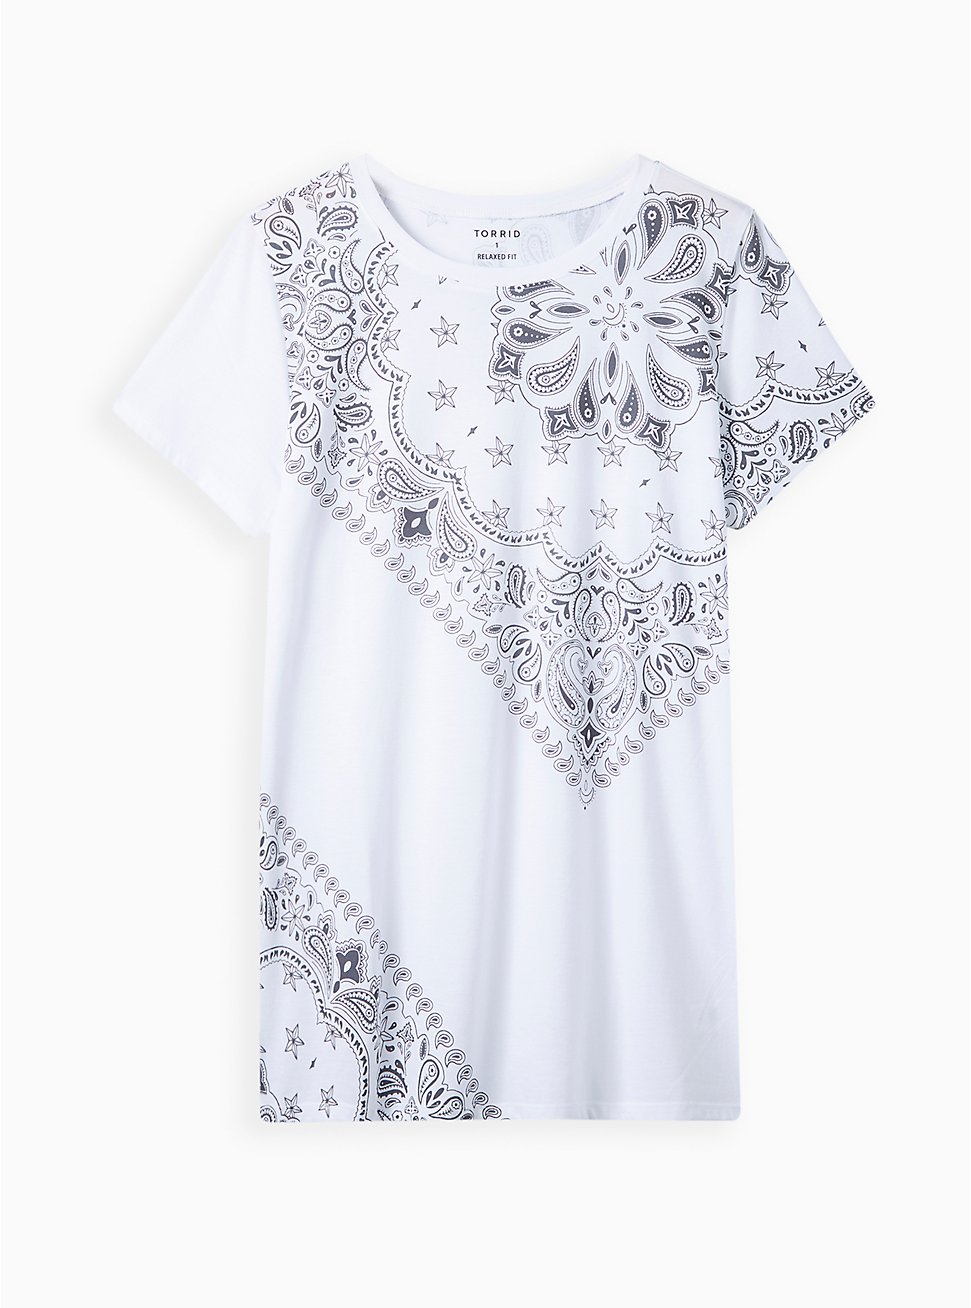 Relaxed Fit Crew Tee – Signature Jersey Bandana White, BRIGHT WHITE, hi-res